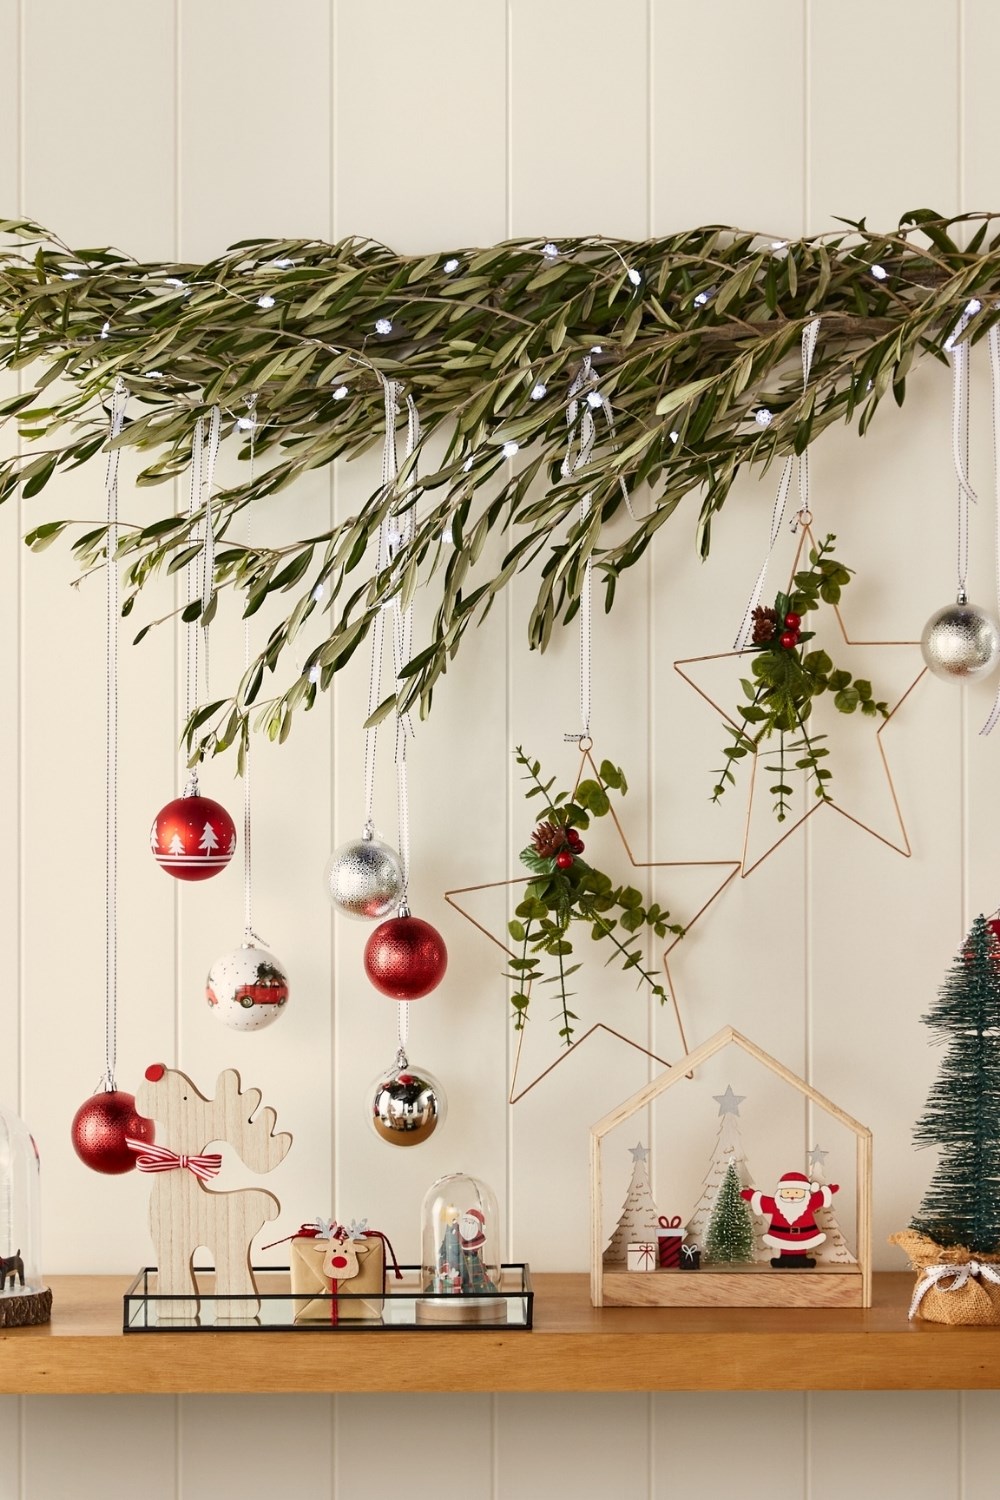 Big W Christmas decorations for 2021  Better Homes and Gardens